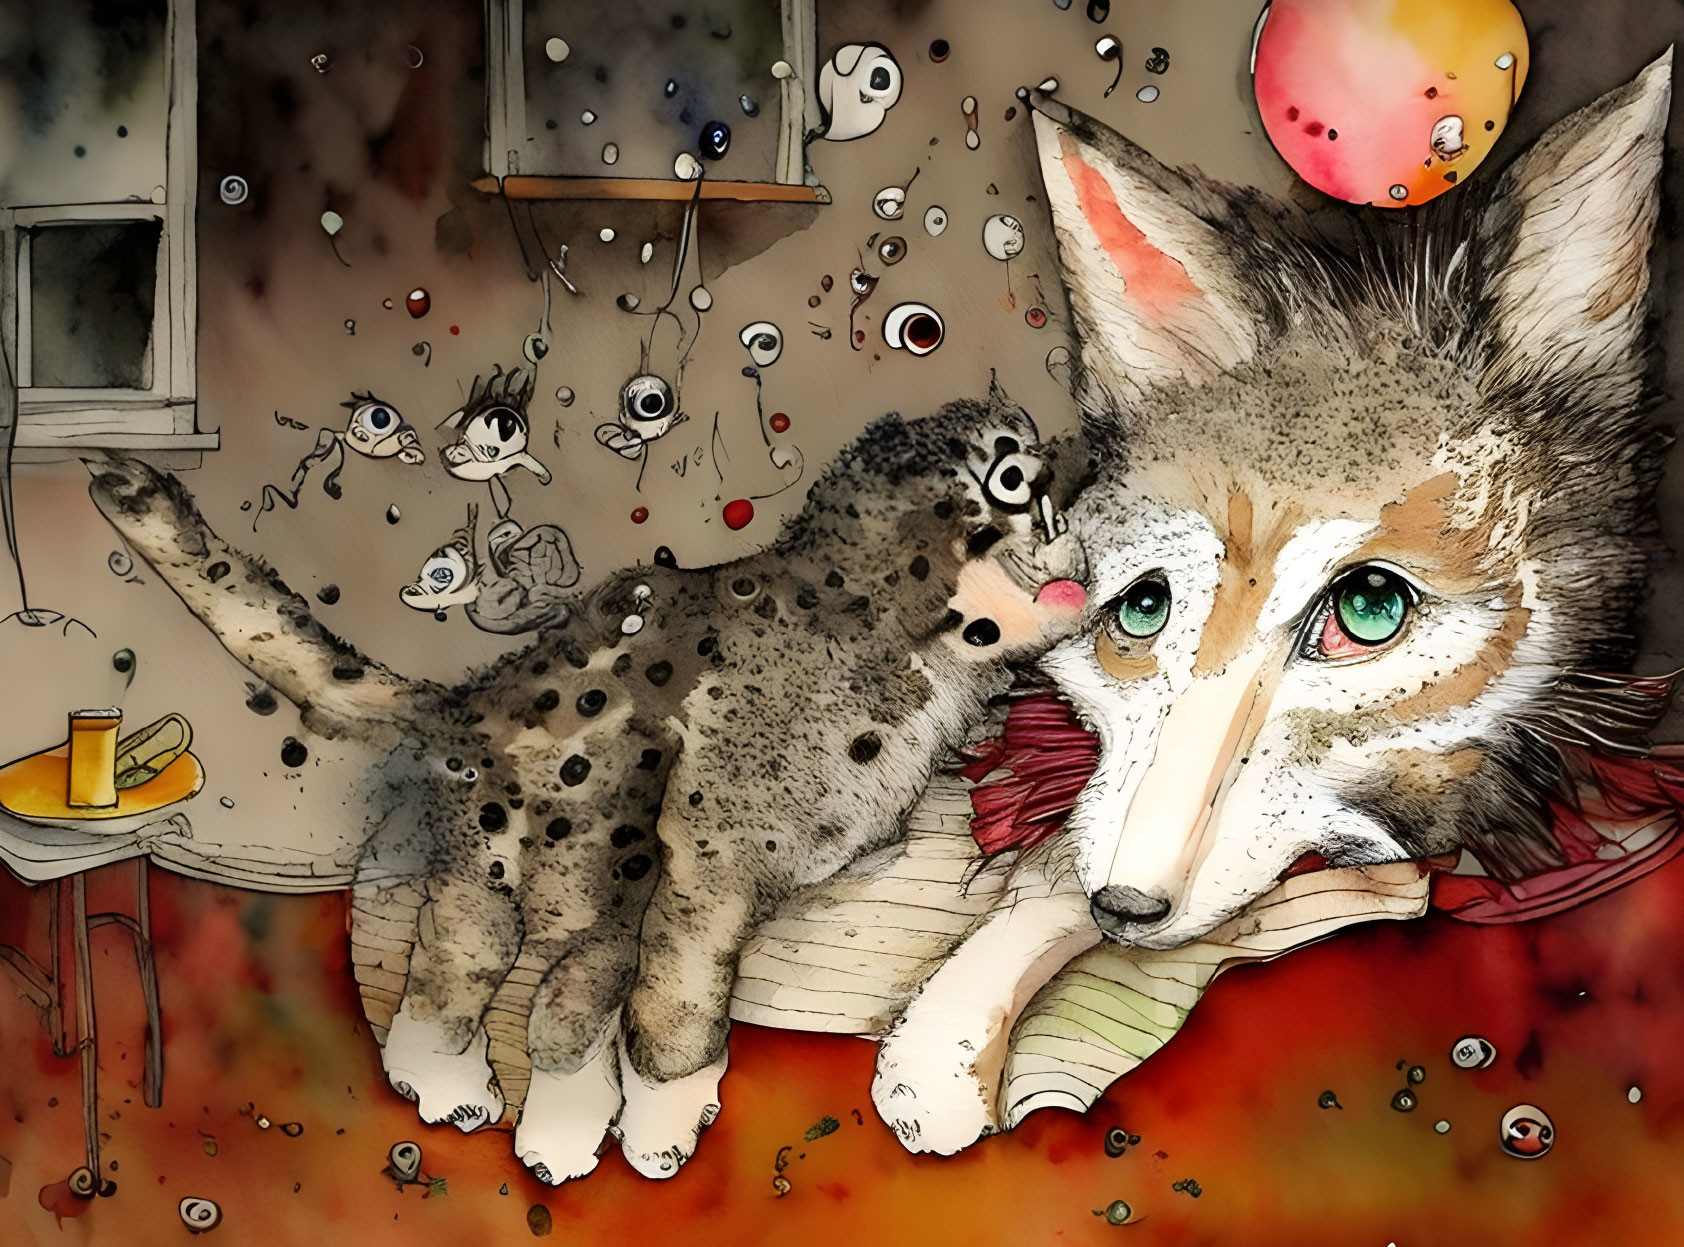 Colorful Surreal Illustration: Large-Eyed Fox with Flying Eyeball Creatures